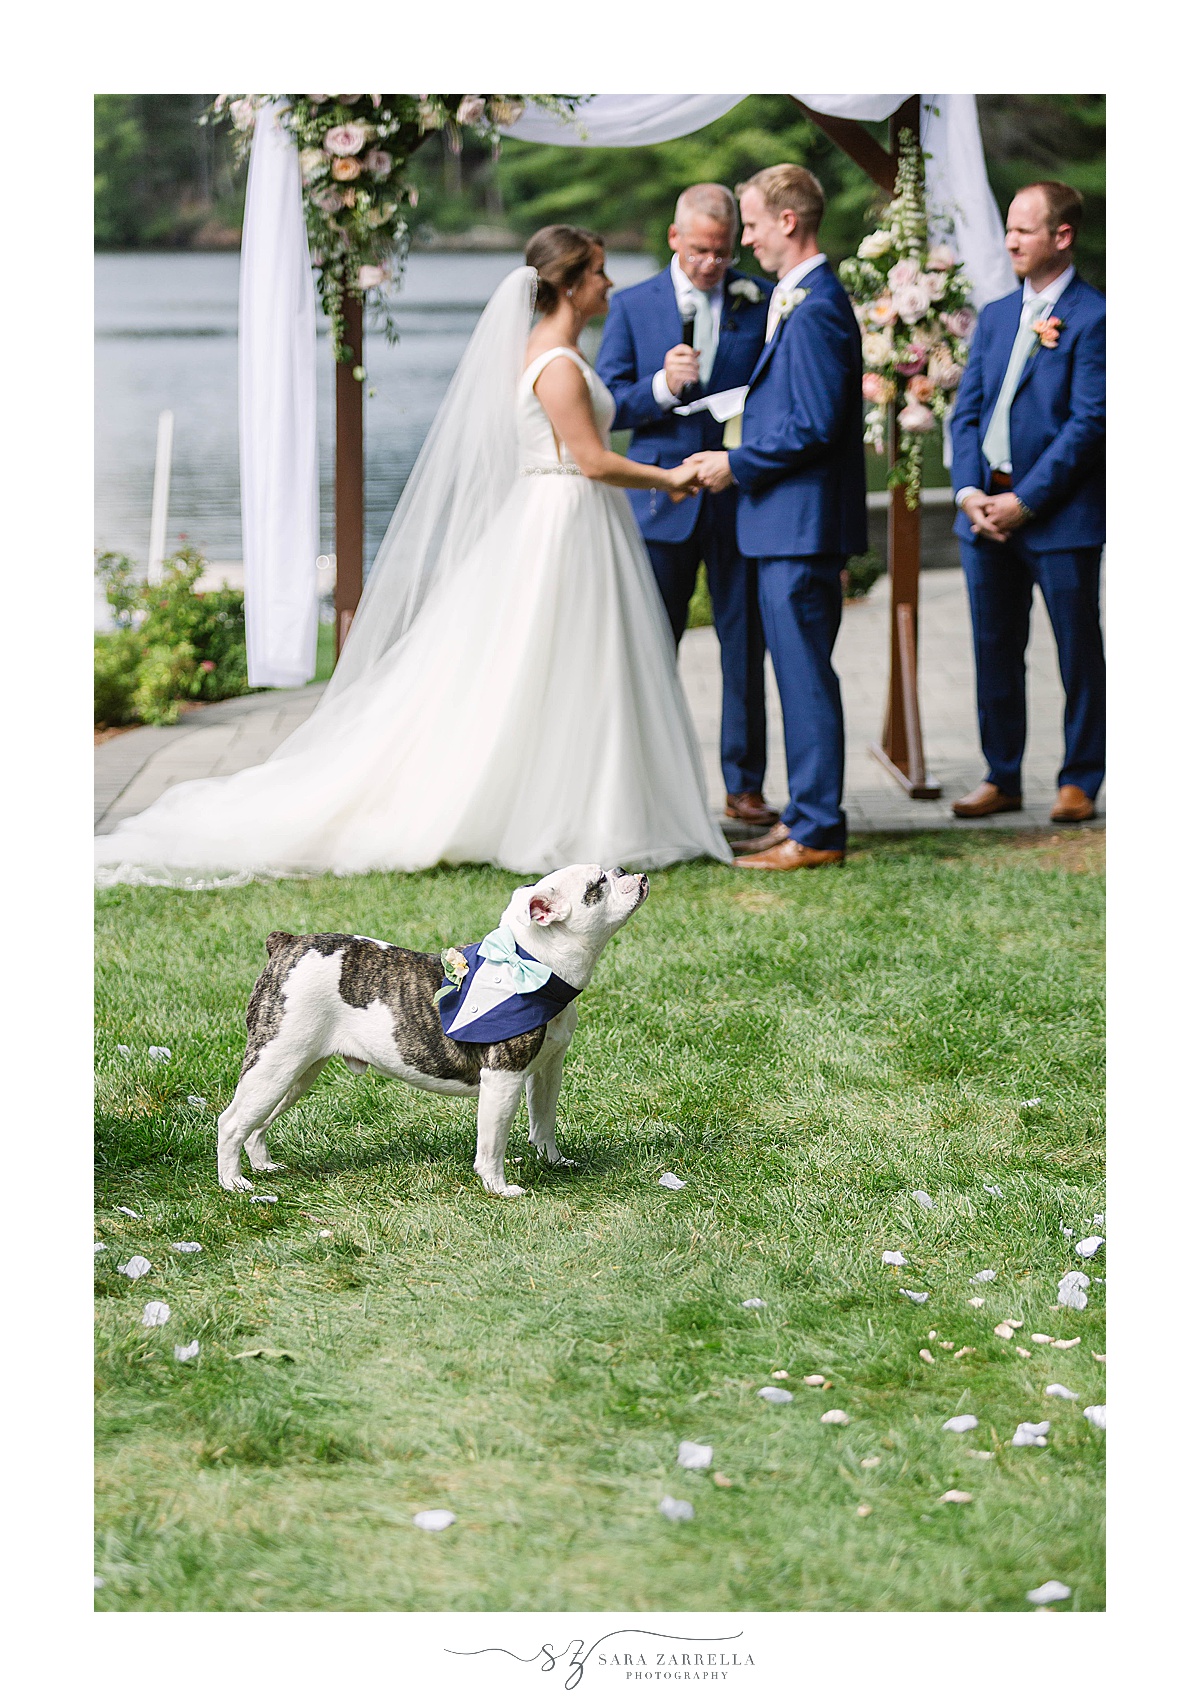 dog watches bride and groom get married in Rhode Island